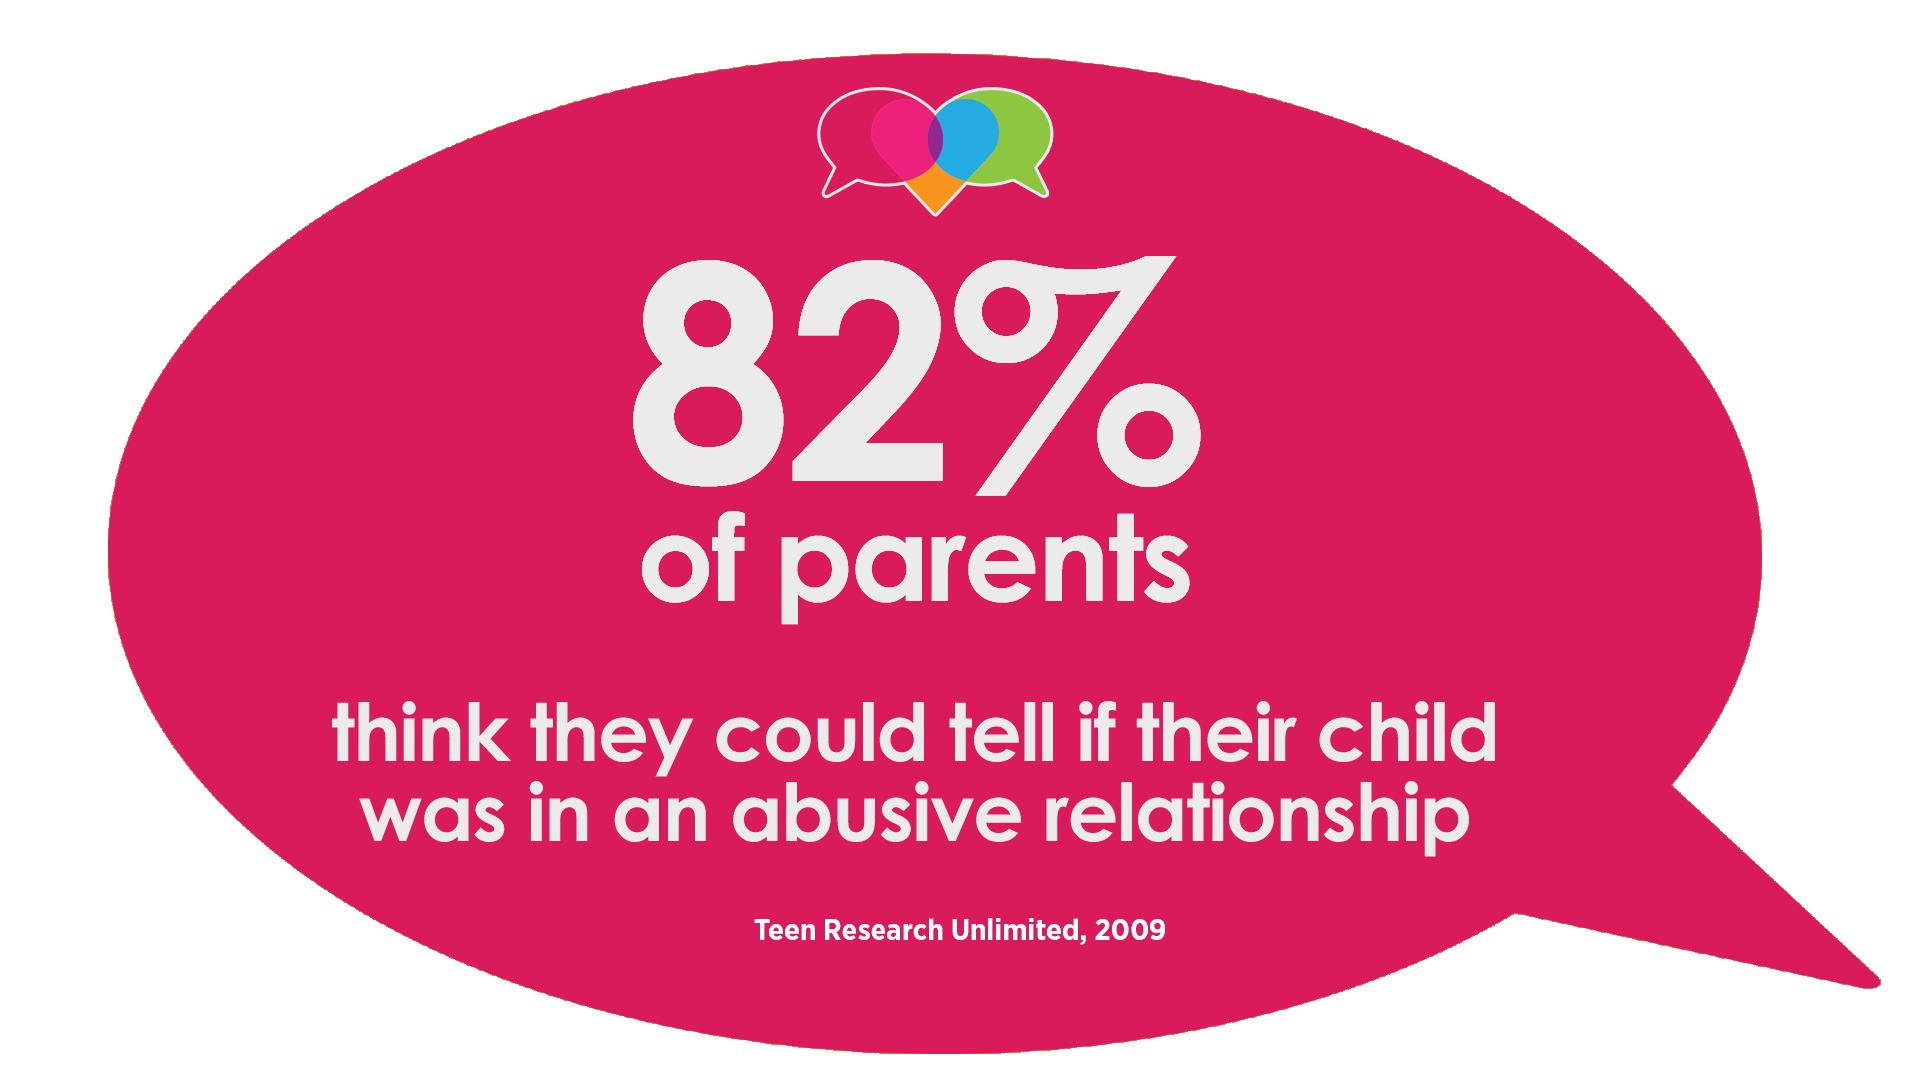 82 % of parents think they could tell if their child was in an abusive relationship